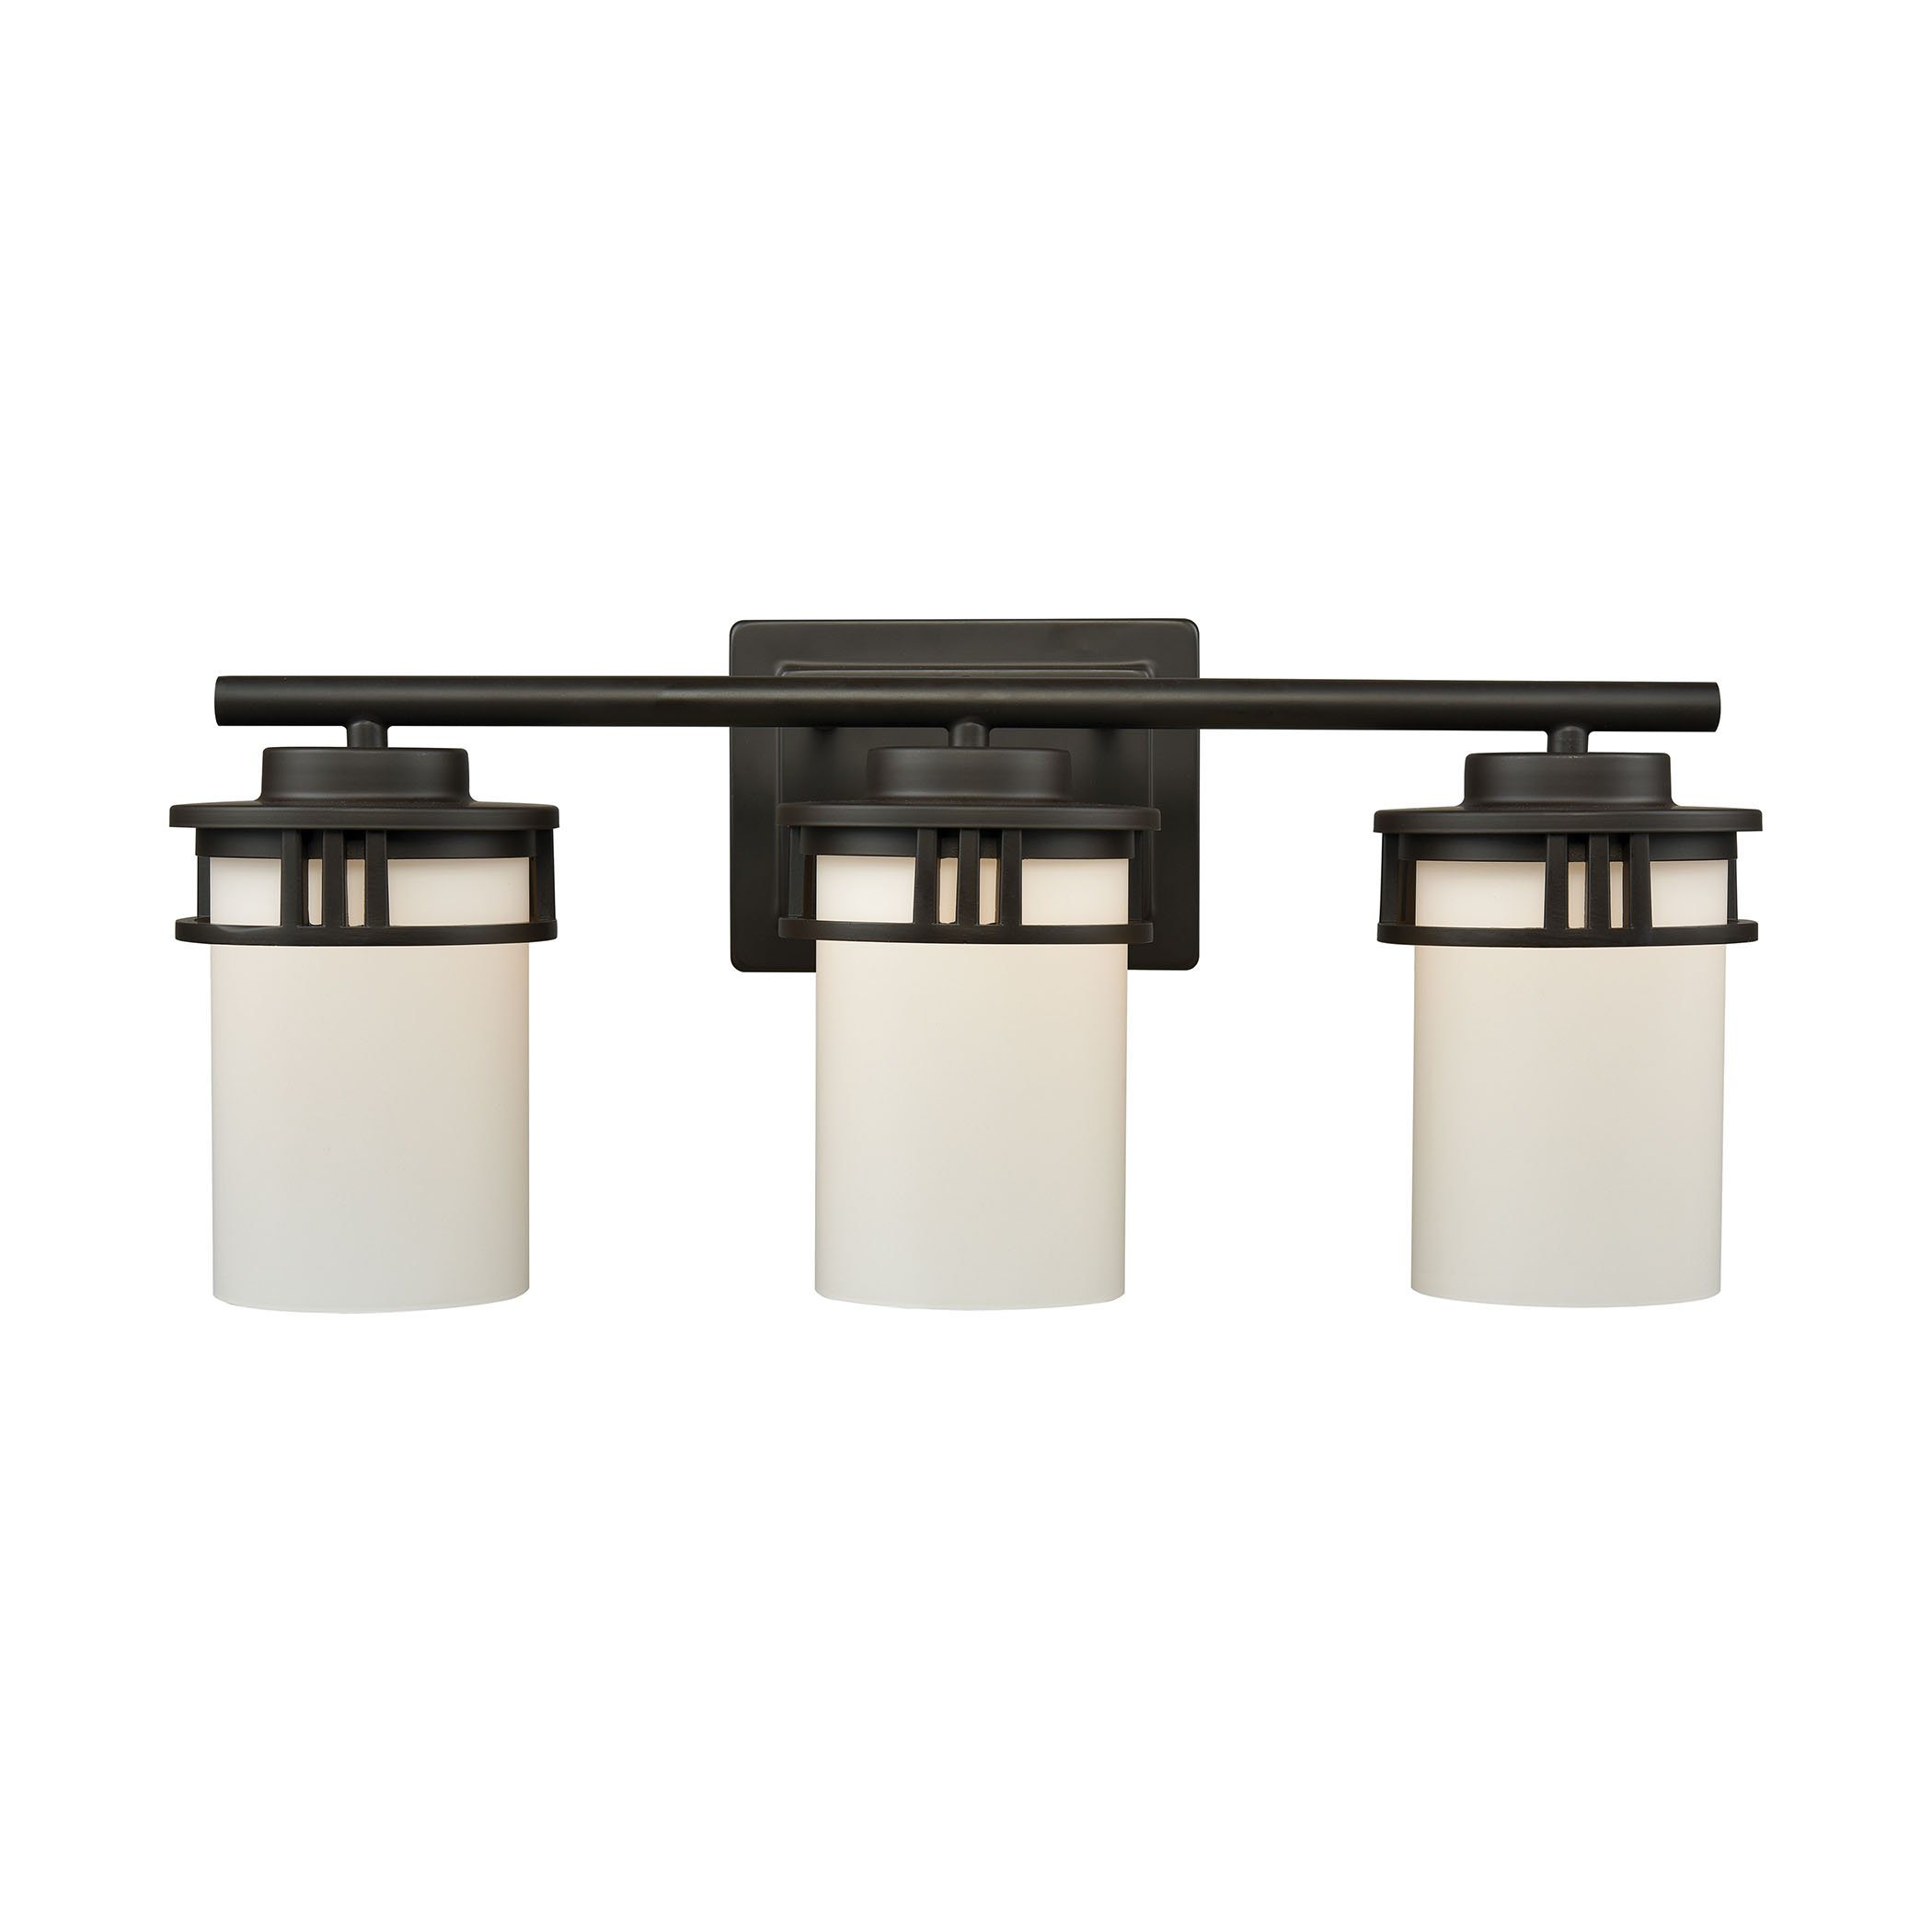 Ravendale 3-Light Bath Vanity Fixture in Oil Rubbed Bronze with Opal White Glass Wall Thomas Lighting 